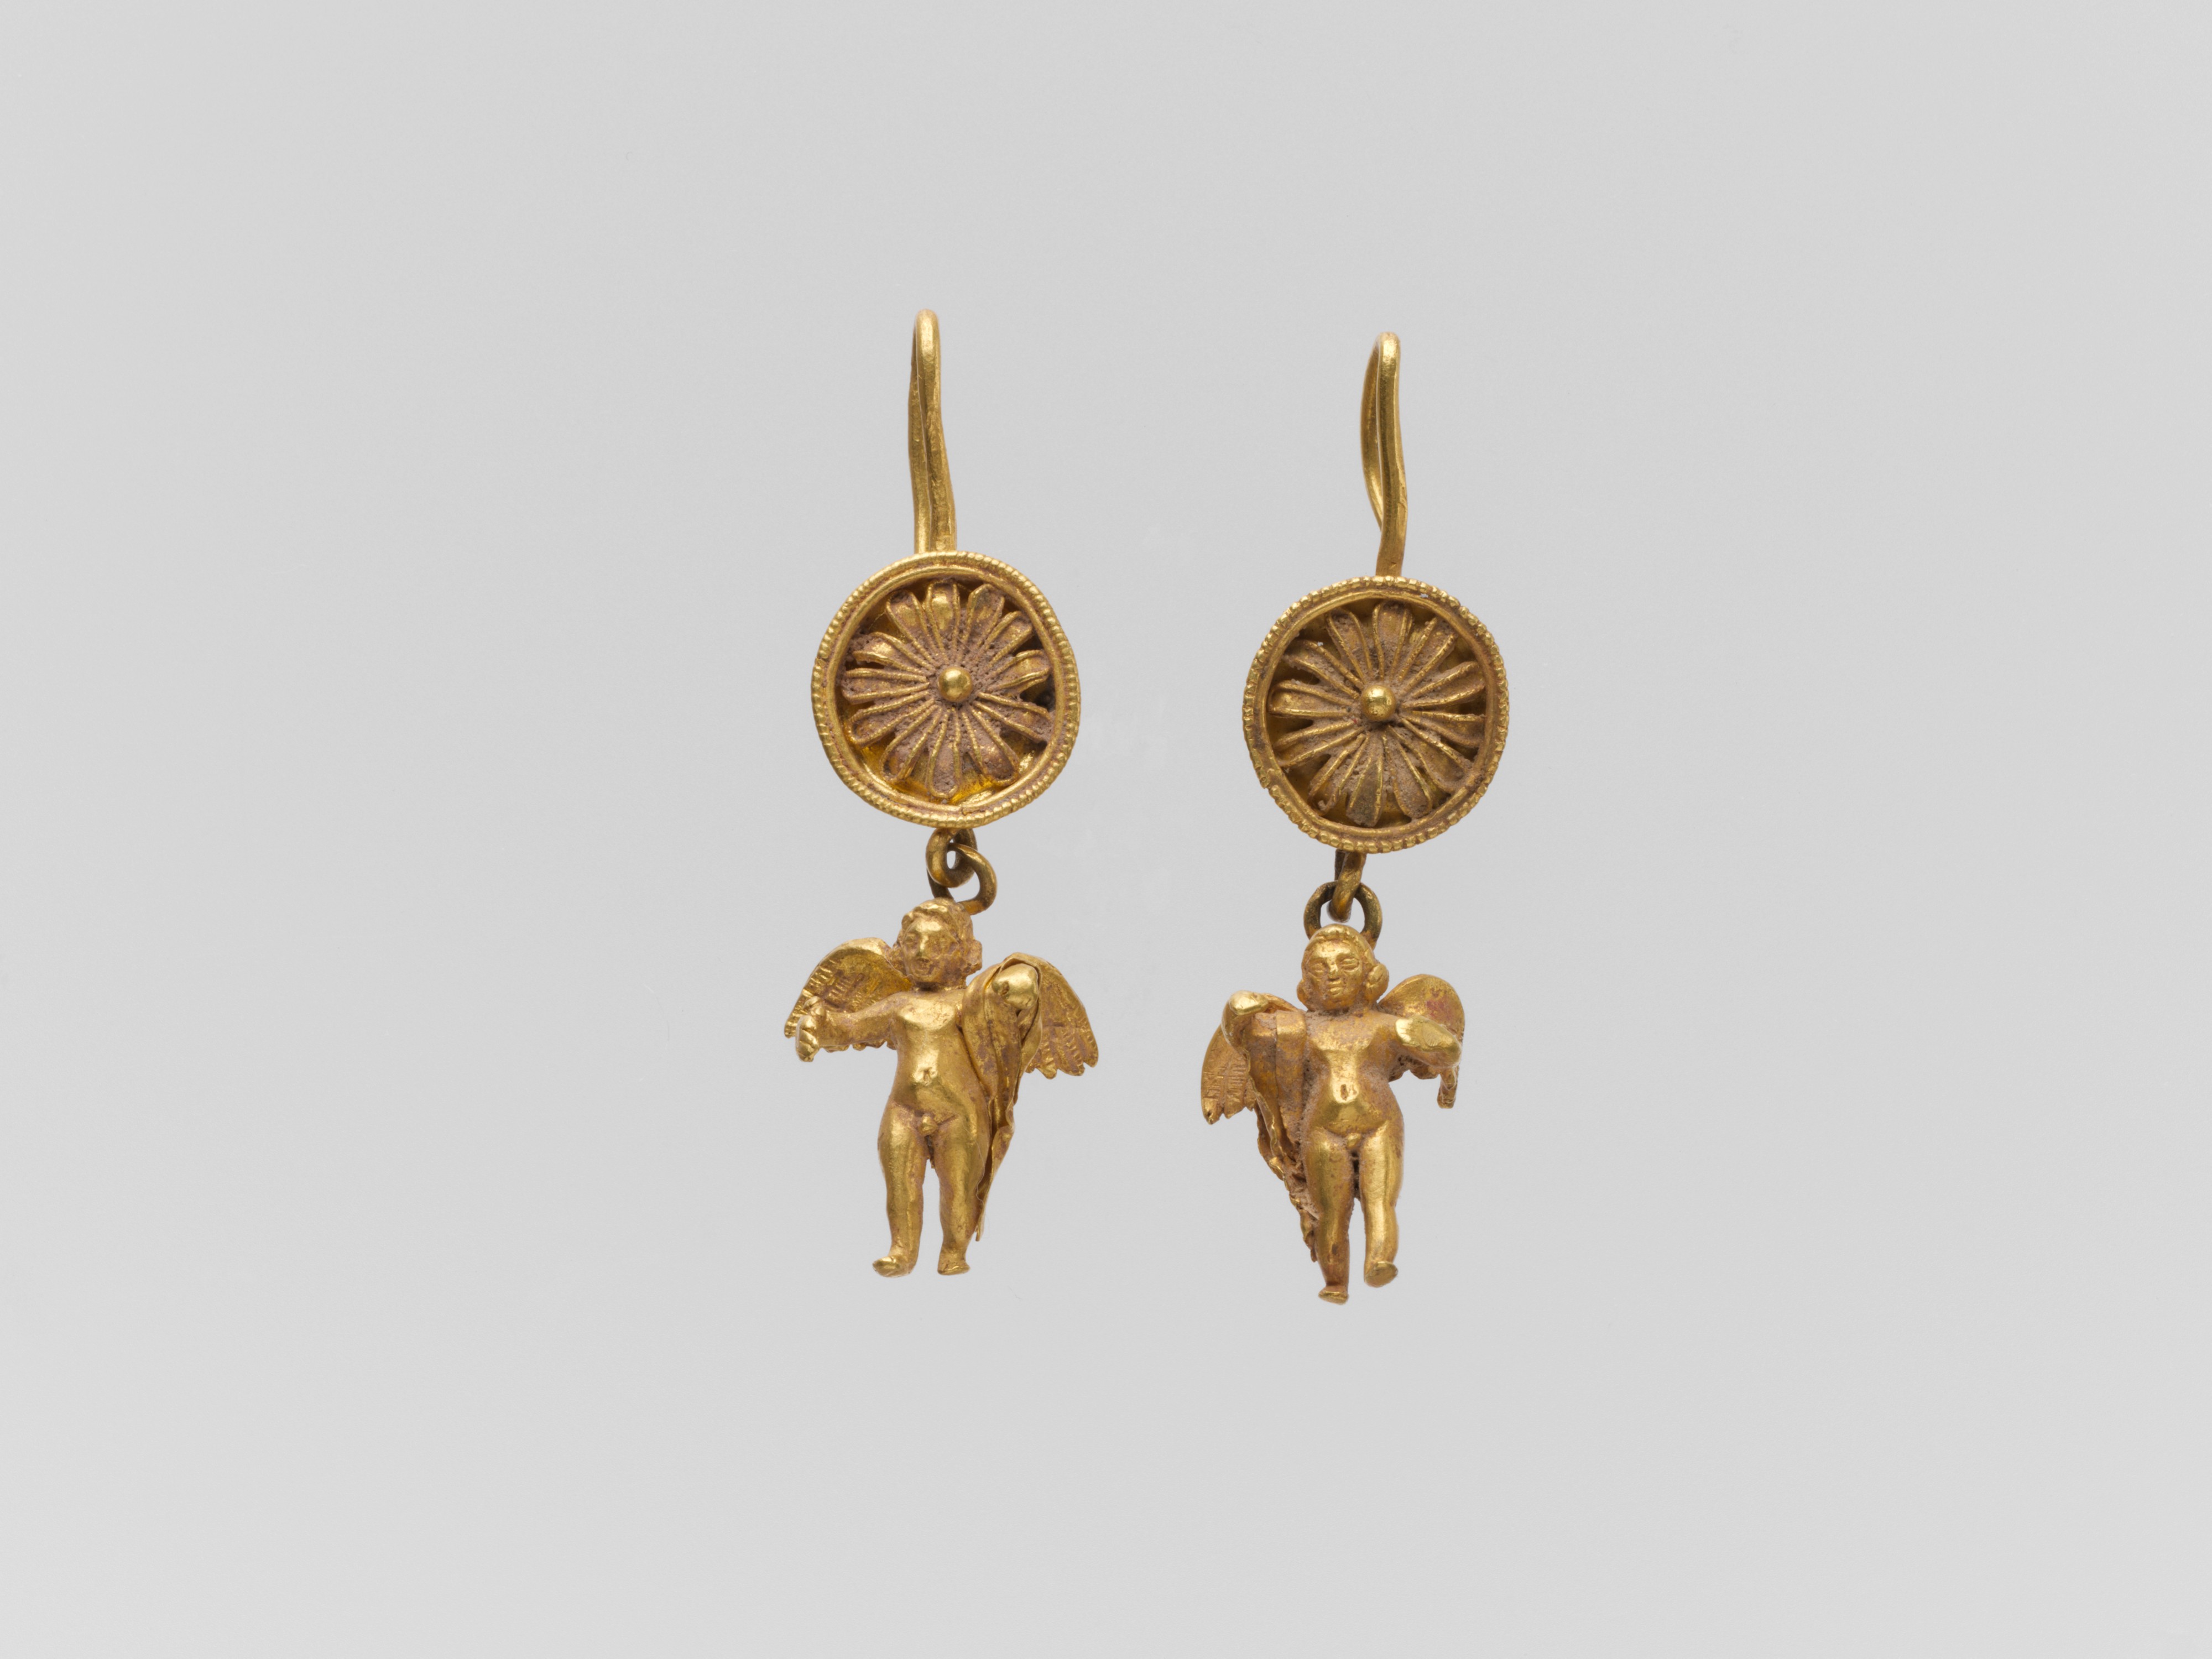 Chain and disc earrings hammered texture earrings Drop chain earrings Disc earrings drop disc earrings Greek earrings grecian earrings